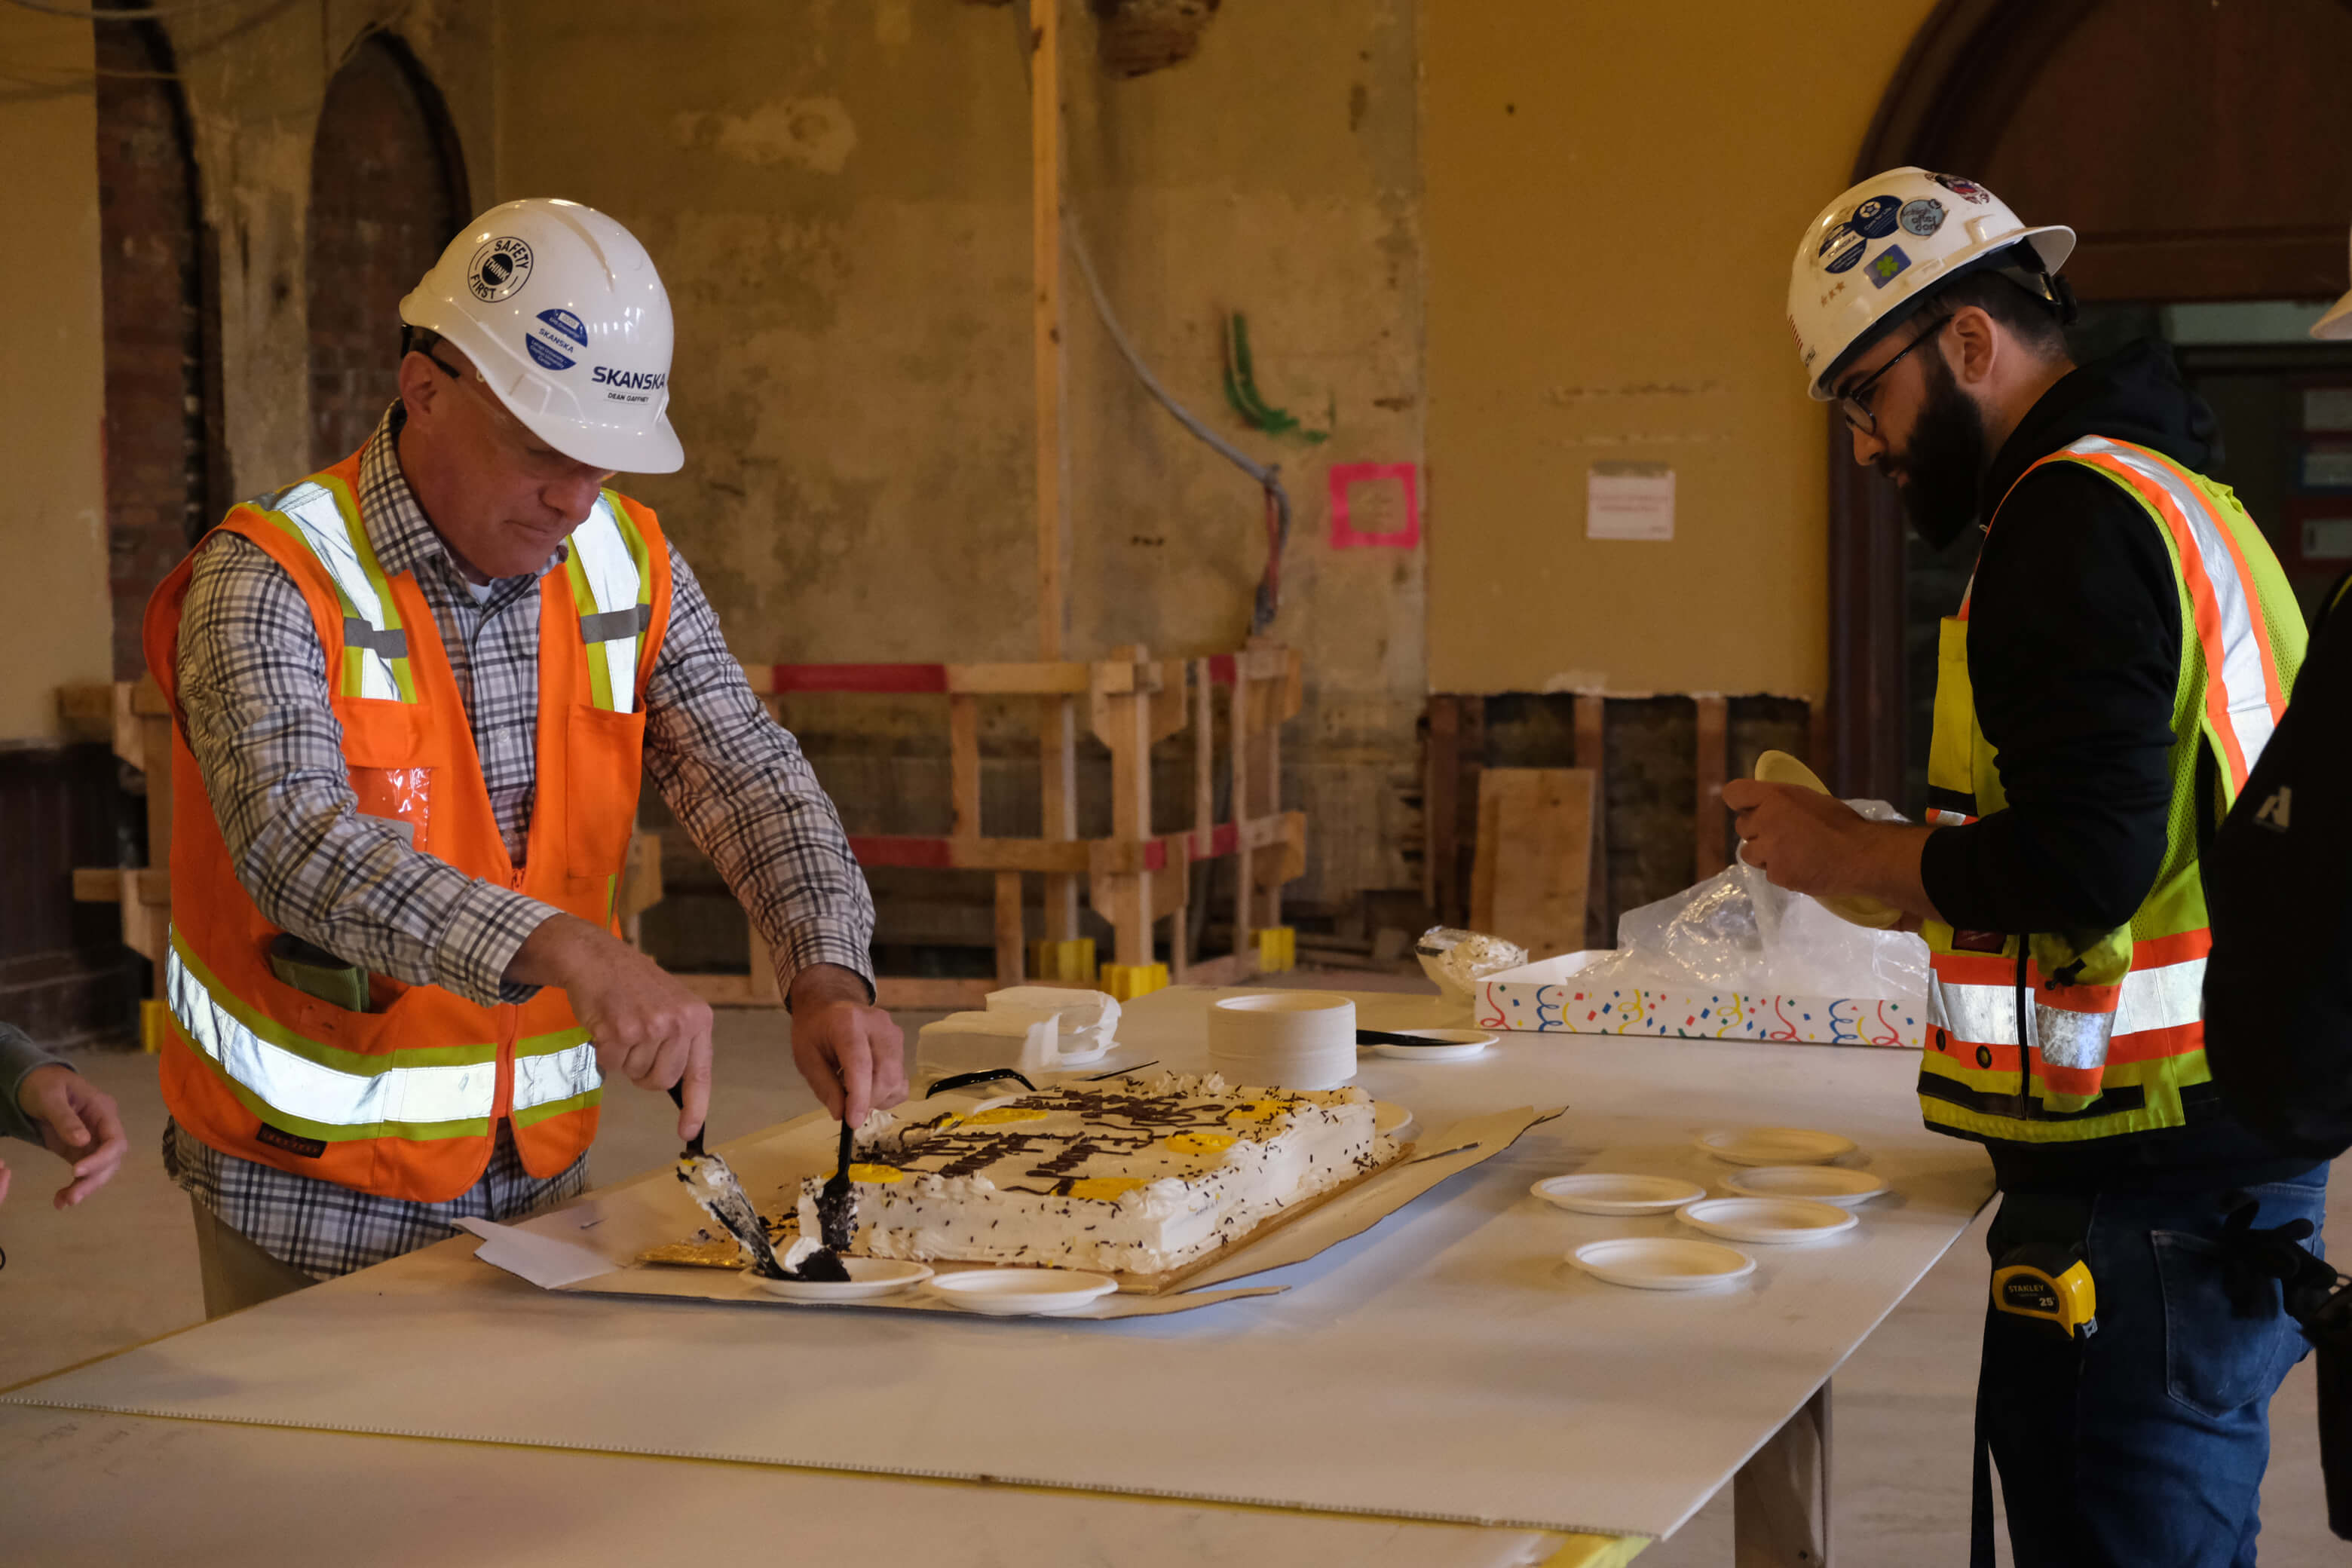 Construction workers cutting a birthday cake